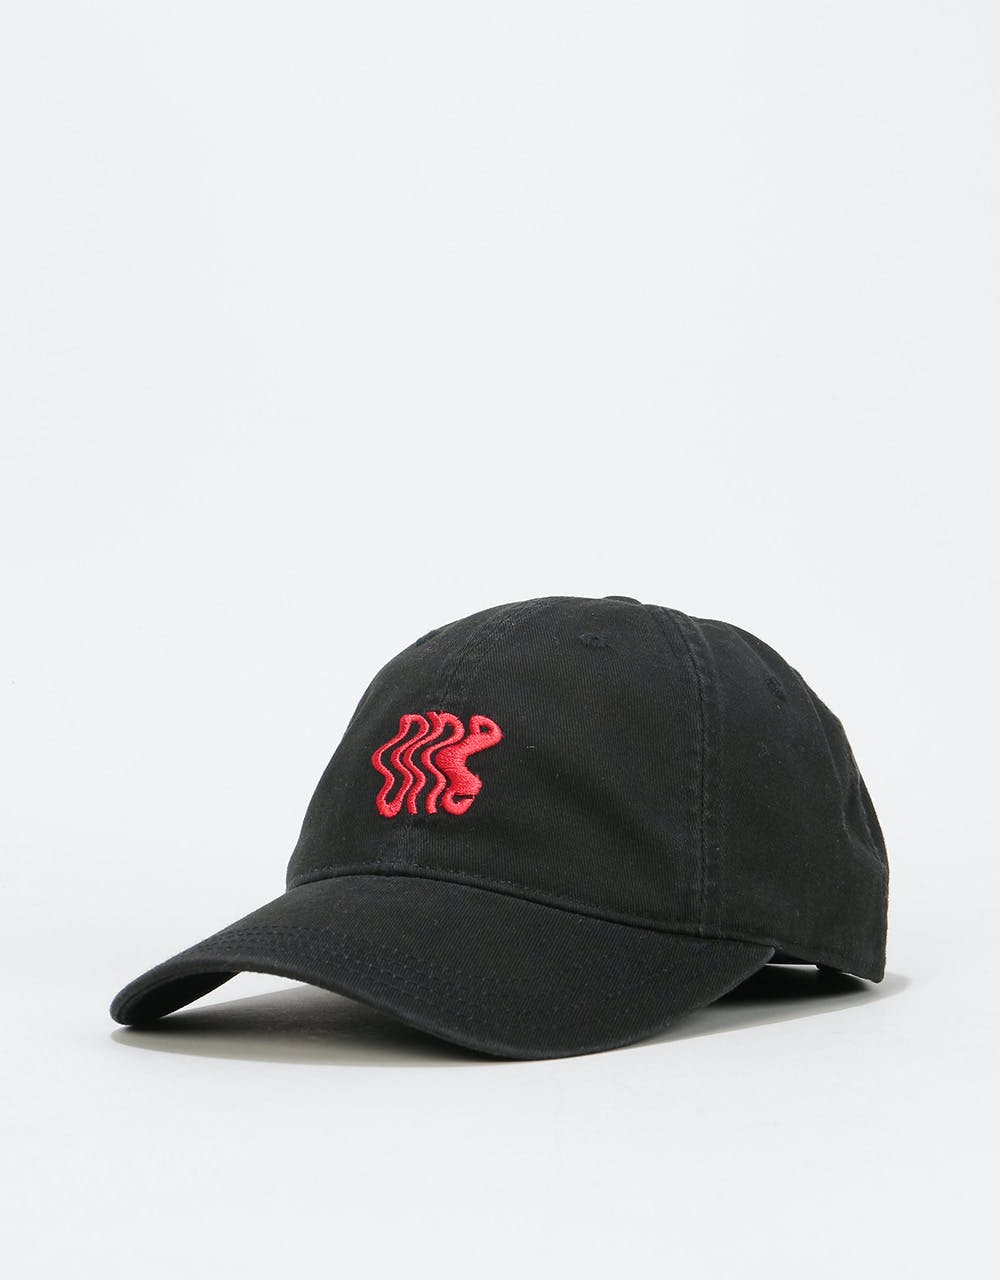 Route One Distorted Cap - Black